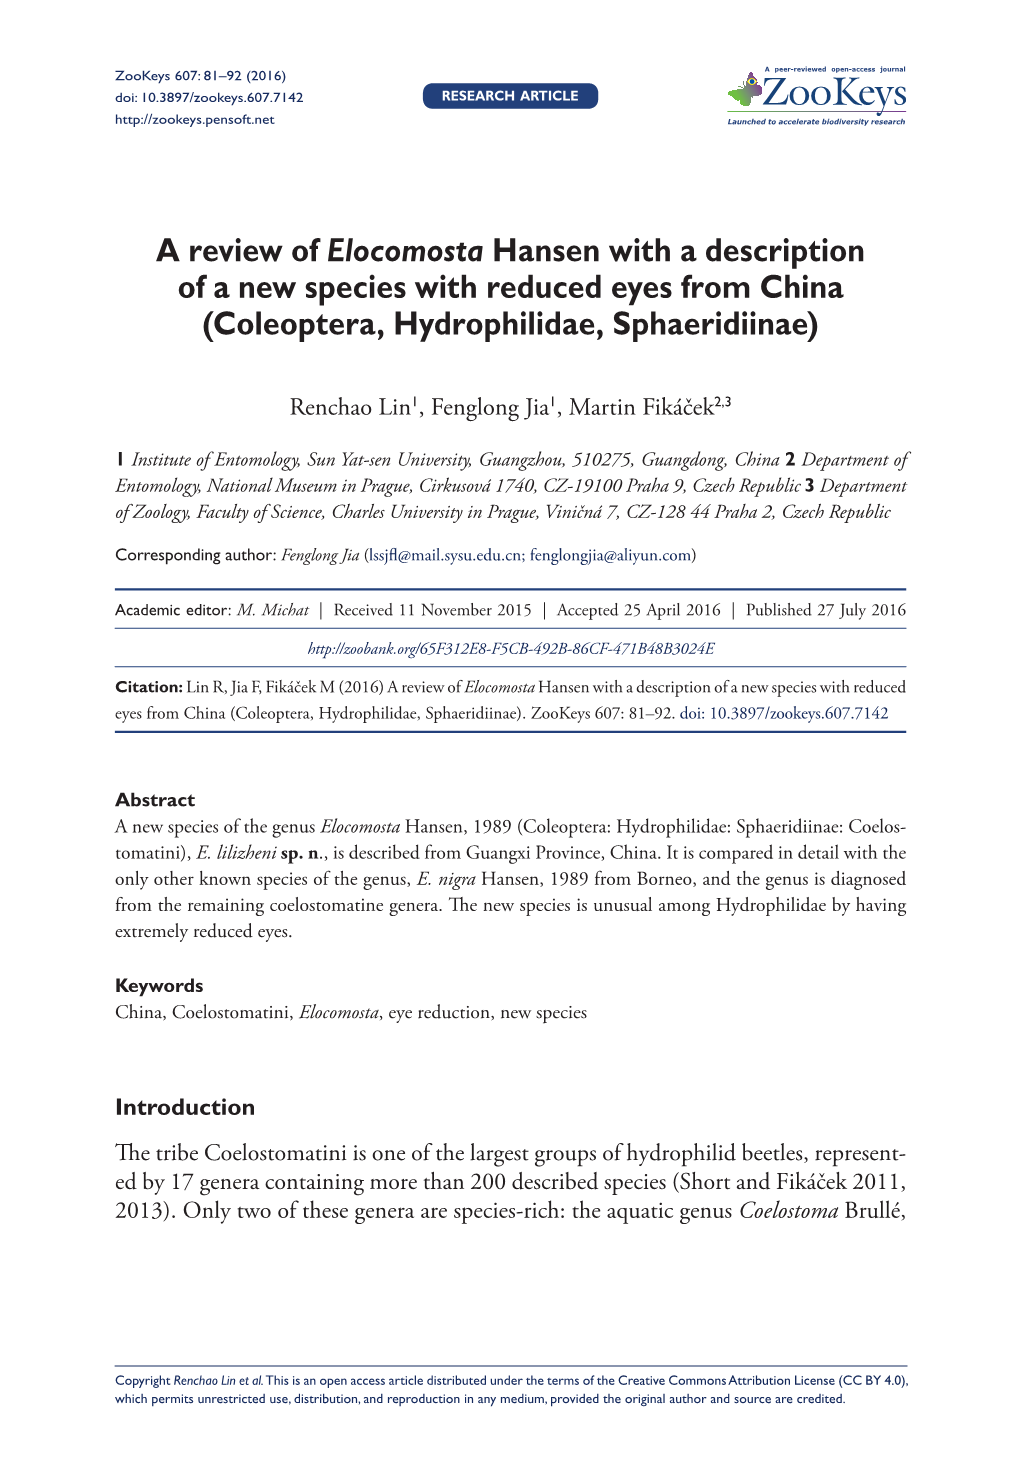 A Review of Elocomosta Hansen with a Description of a New Species with Reduced Eyes from China (Coleoptera, Hydrophilidae, Sphaeridiinae)